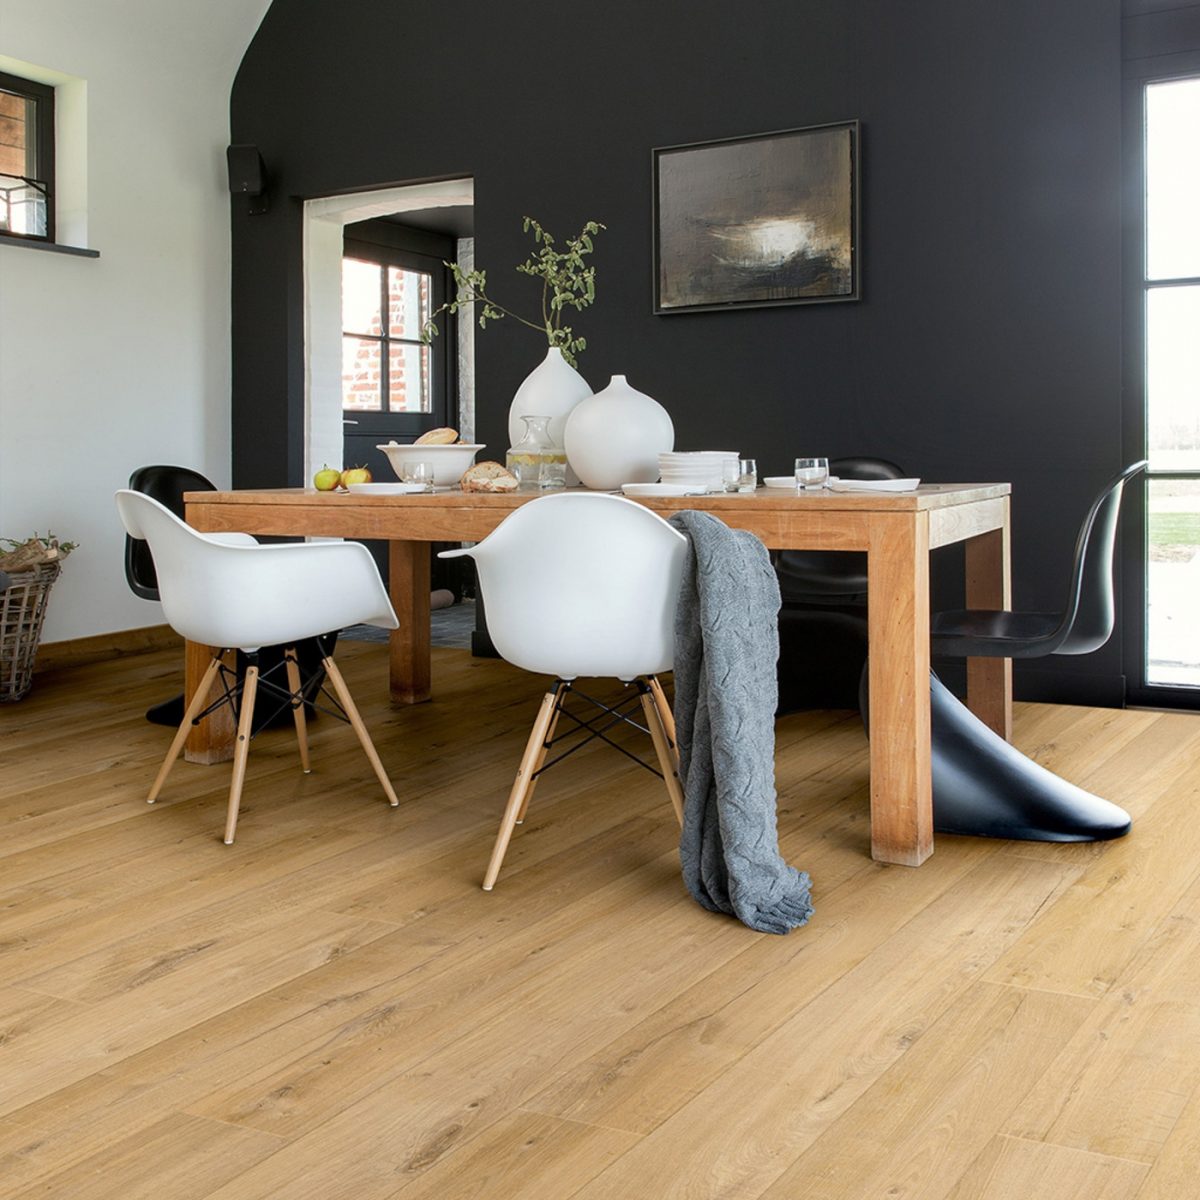 Soft oak style kitchen floor displaying the natural aesthetic of laminate planks